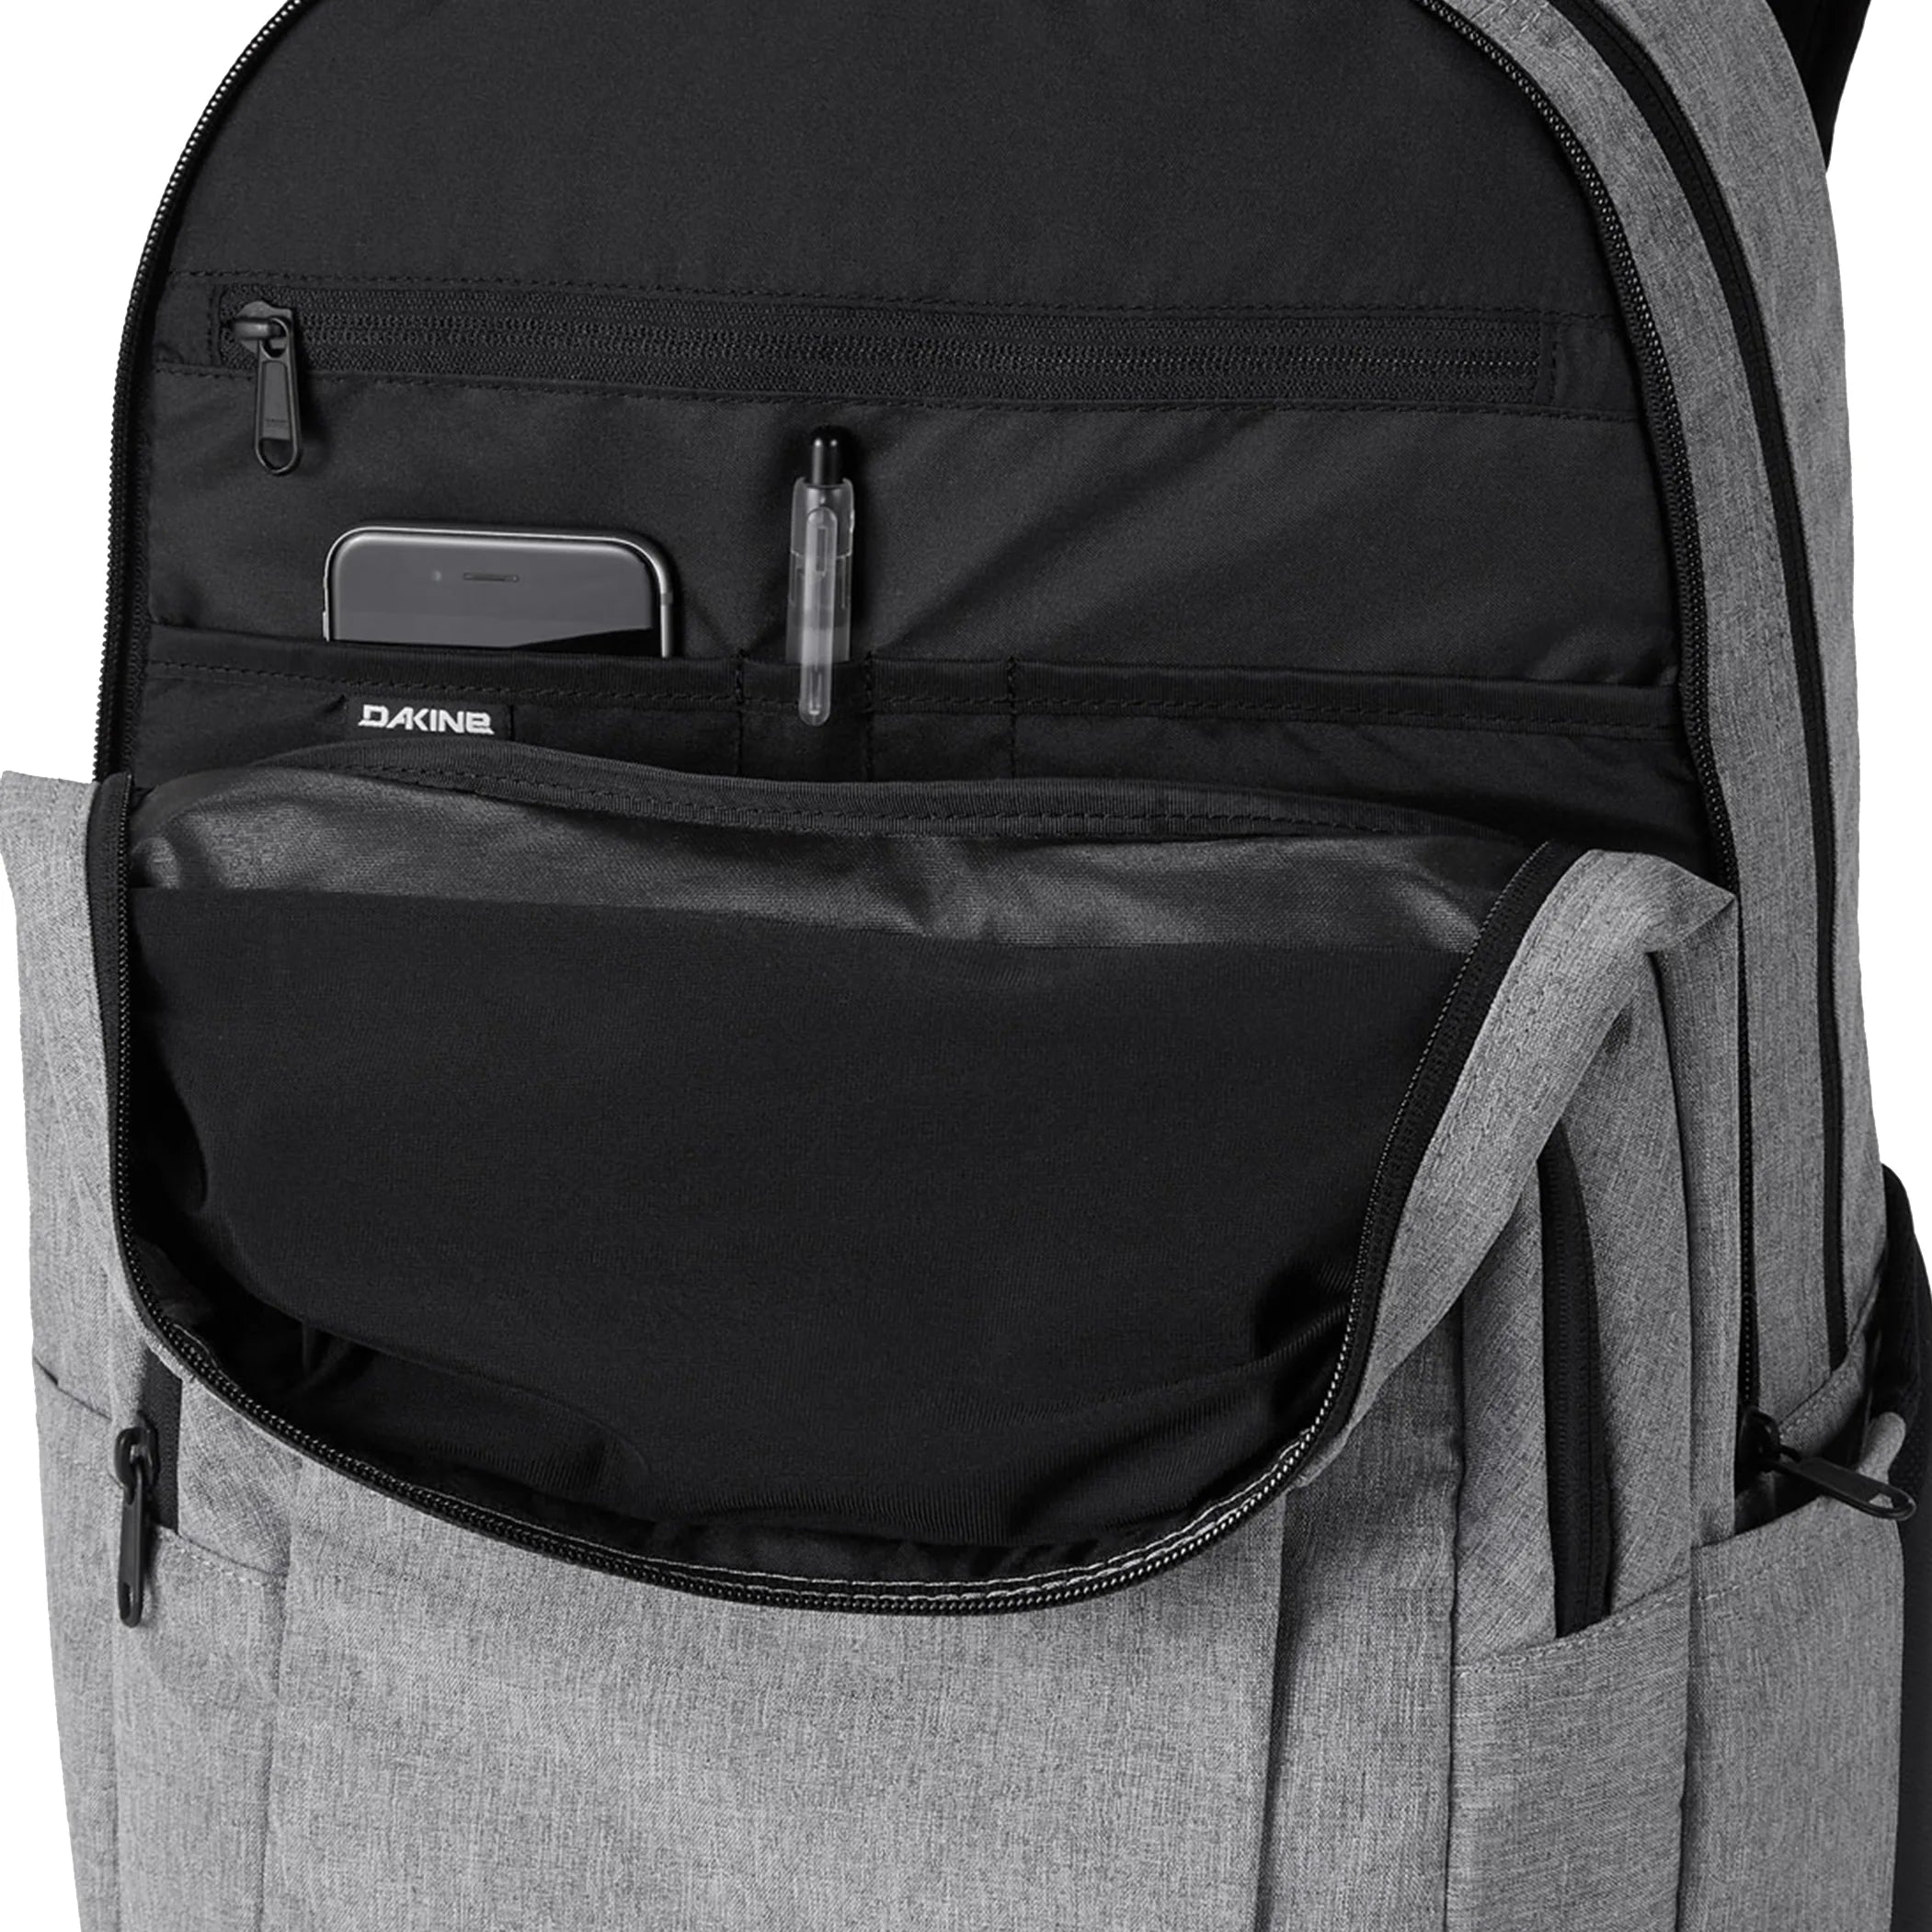 Dakine Packs & Bags Campus L 33L Backpack with laptop compartment 52 cm - Tropic Dream